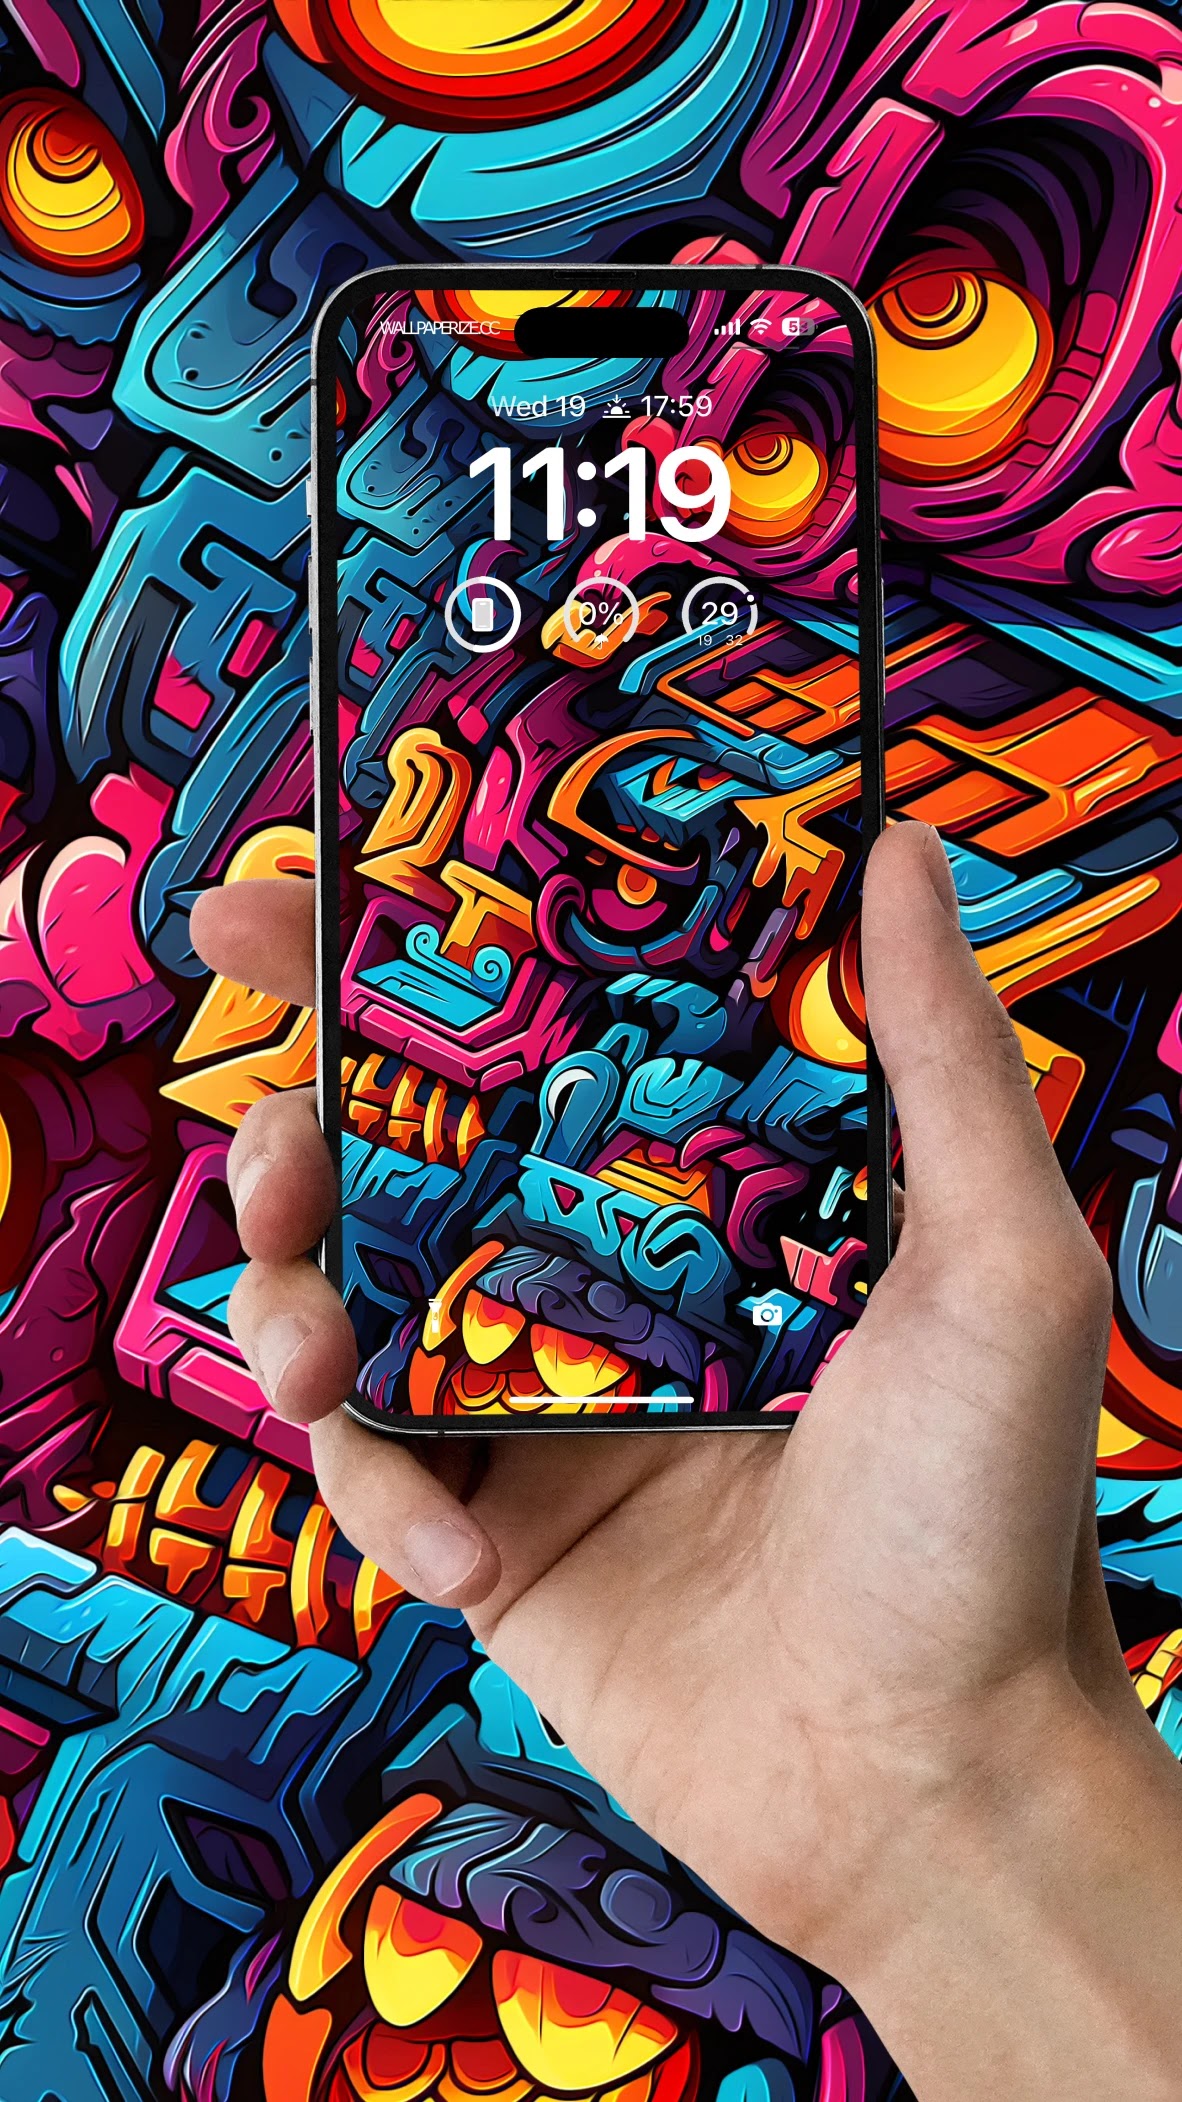 MOSAIC ABSTRACT DESIGN WALLPAPER FOR PHONE